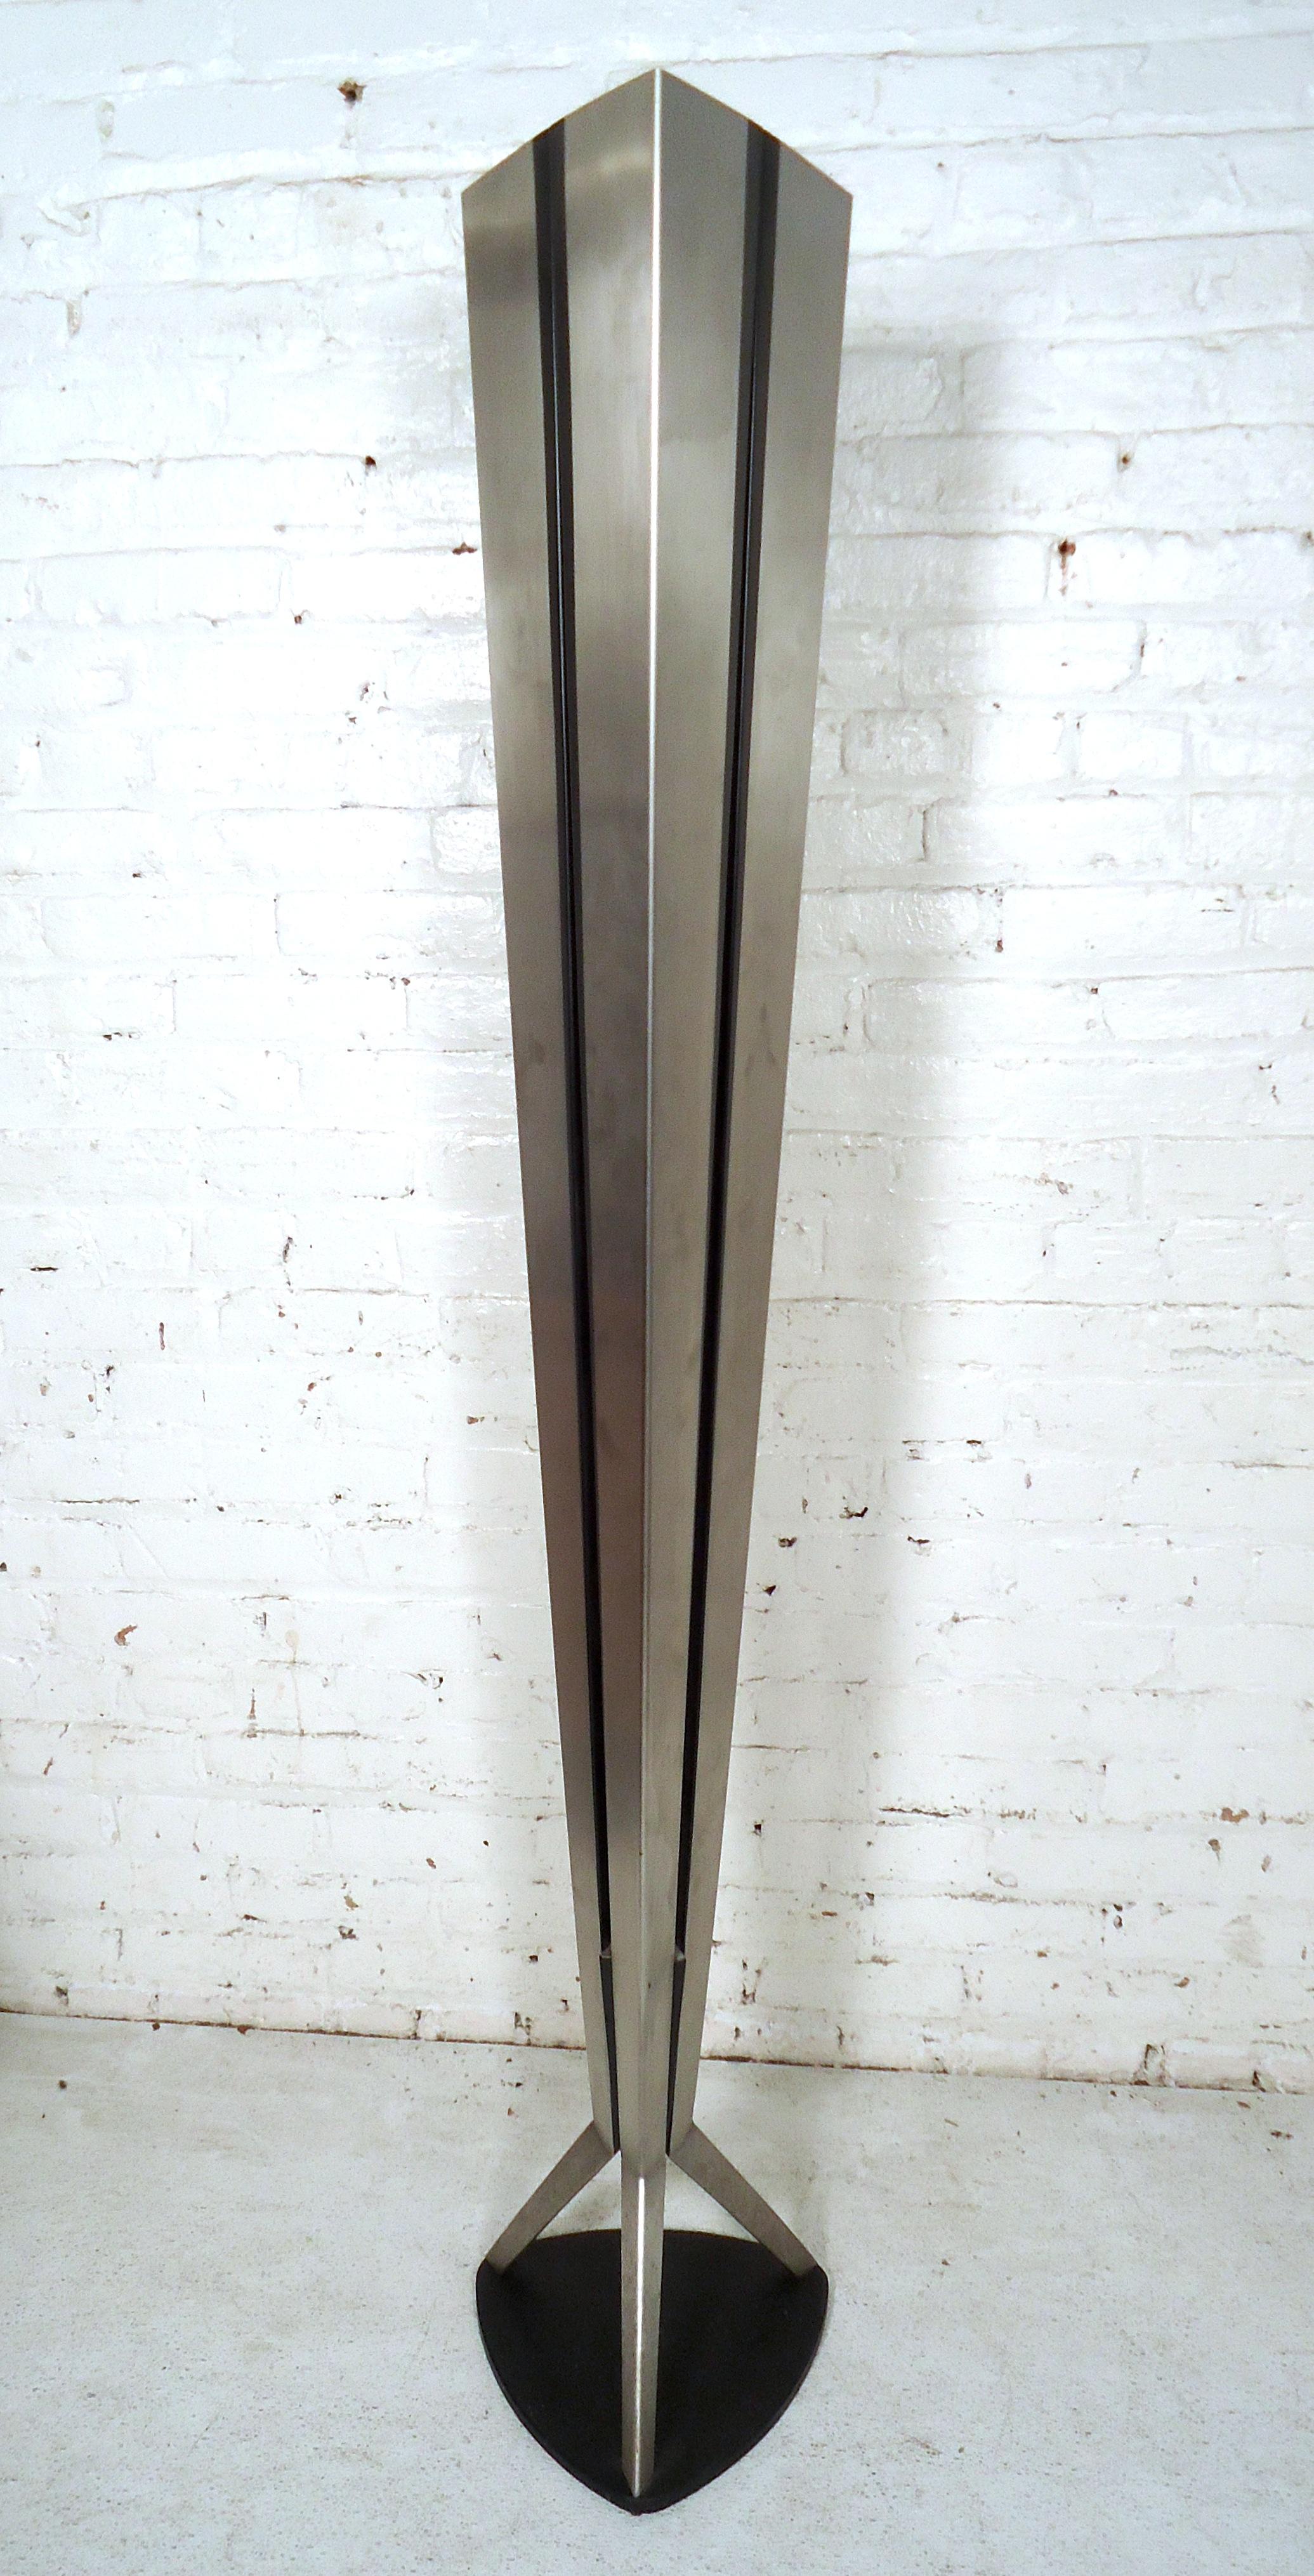 Mid-Century Modern stainless steel four bulb floor lamp featuring a sturdy tripod base.

Please confirm item location (NY or NJ) with dealer.